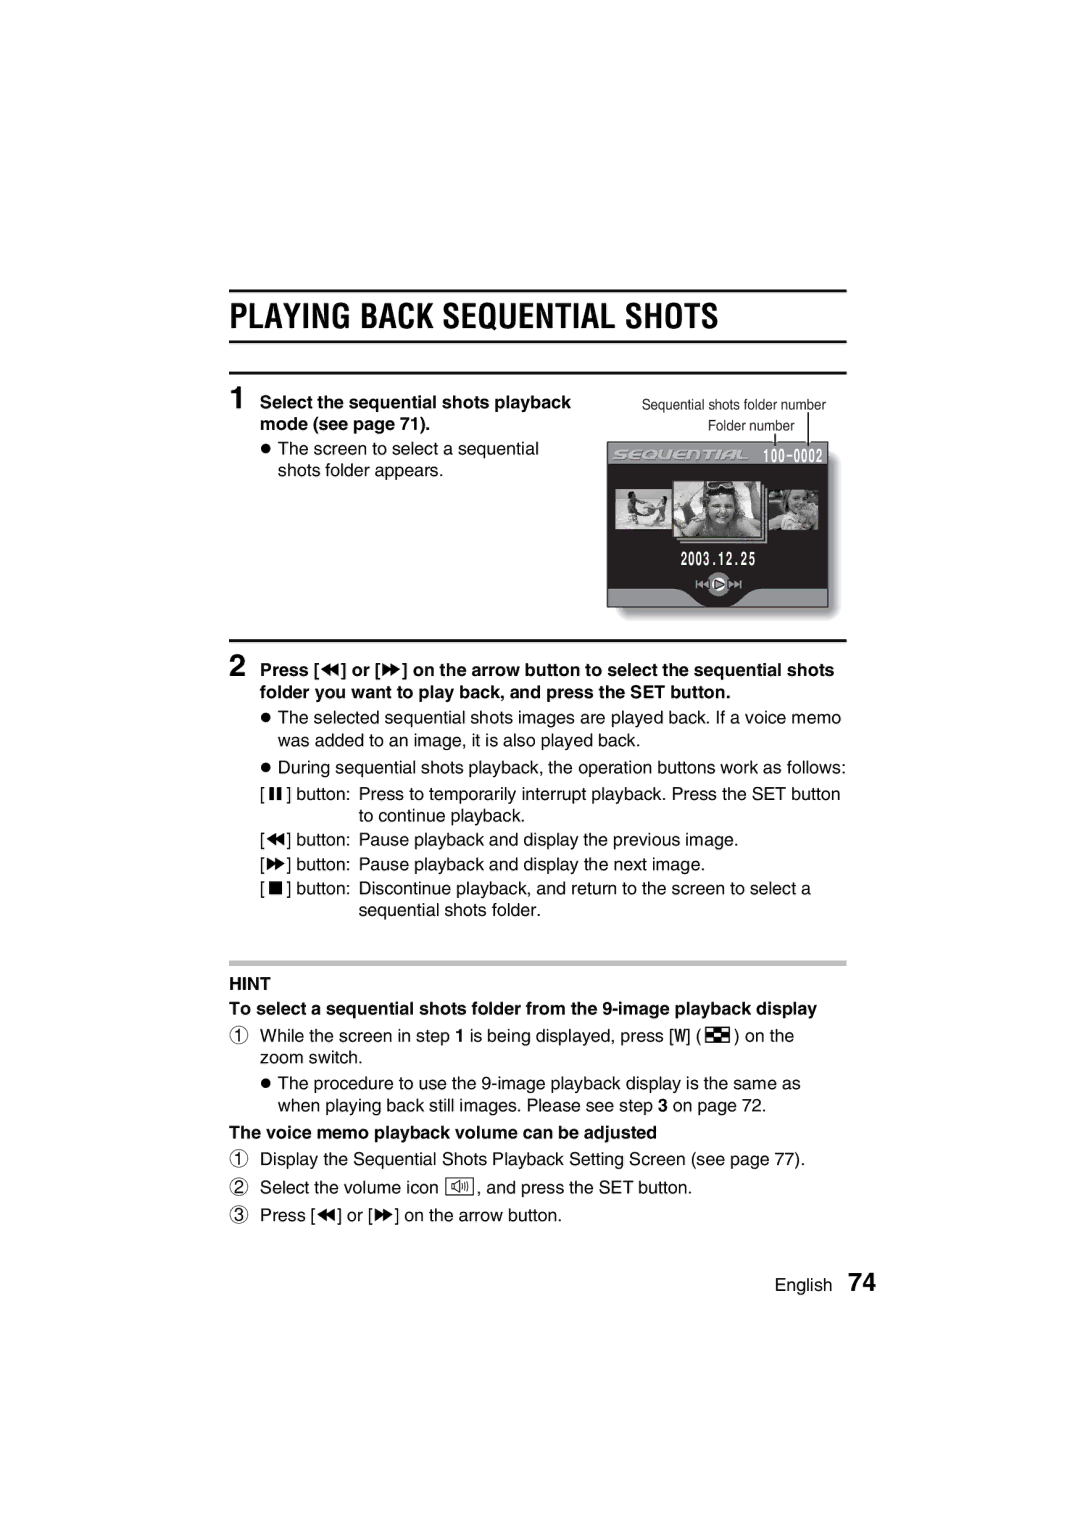 Sanyo VPC-J1EX instruction manual Playing Back Sequential Shots, Select the sequential shots playback mode see 